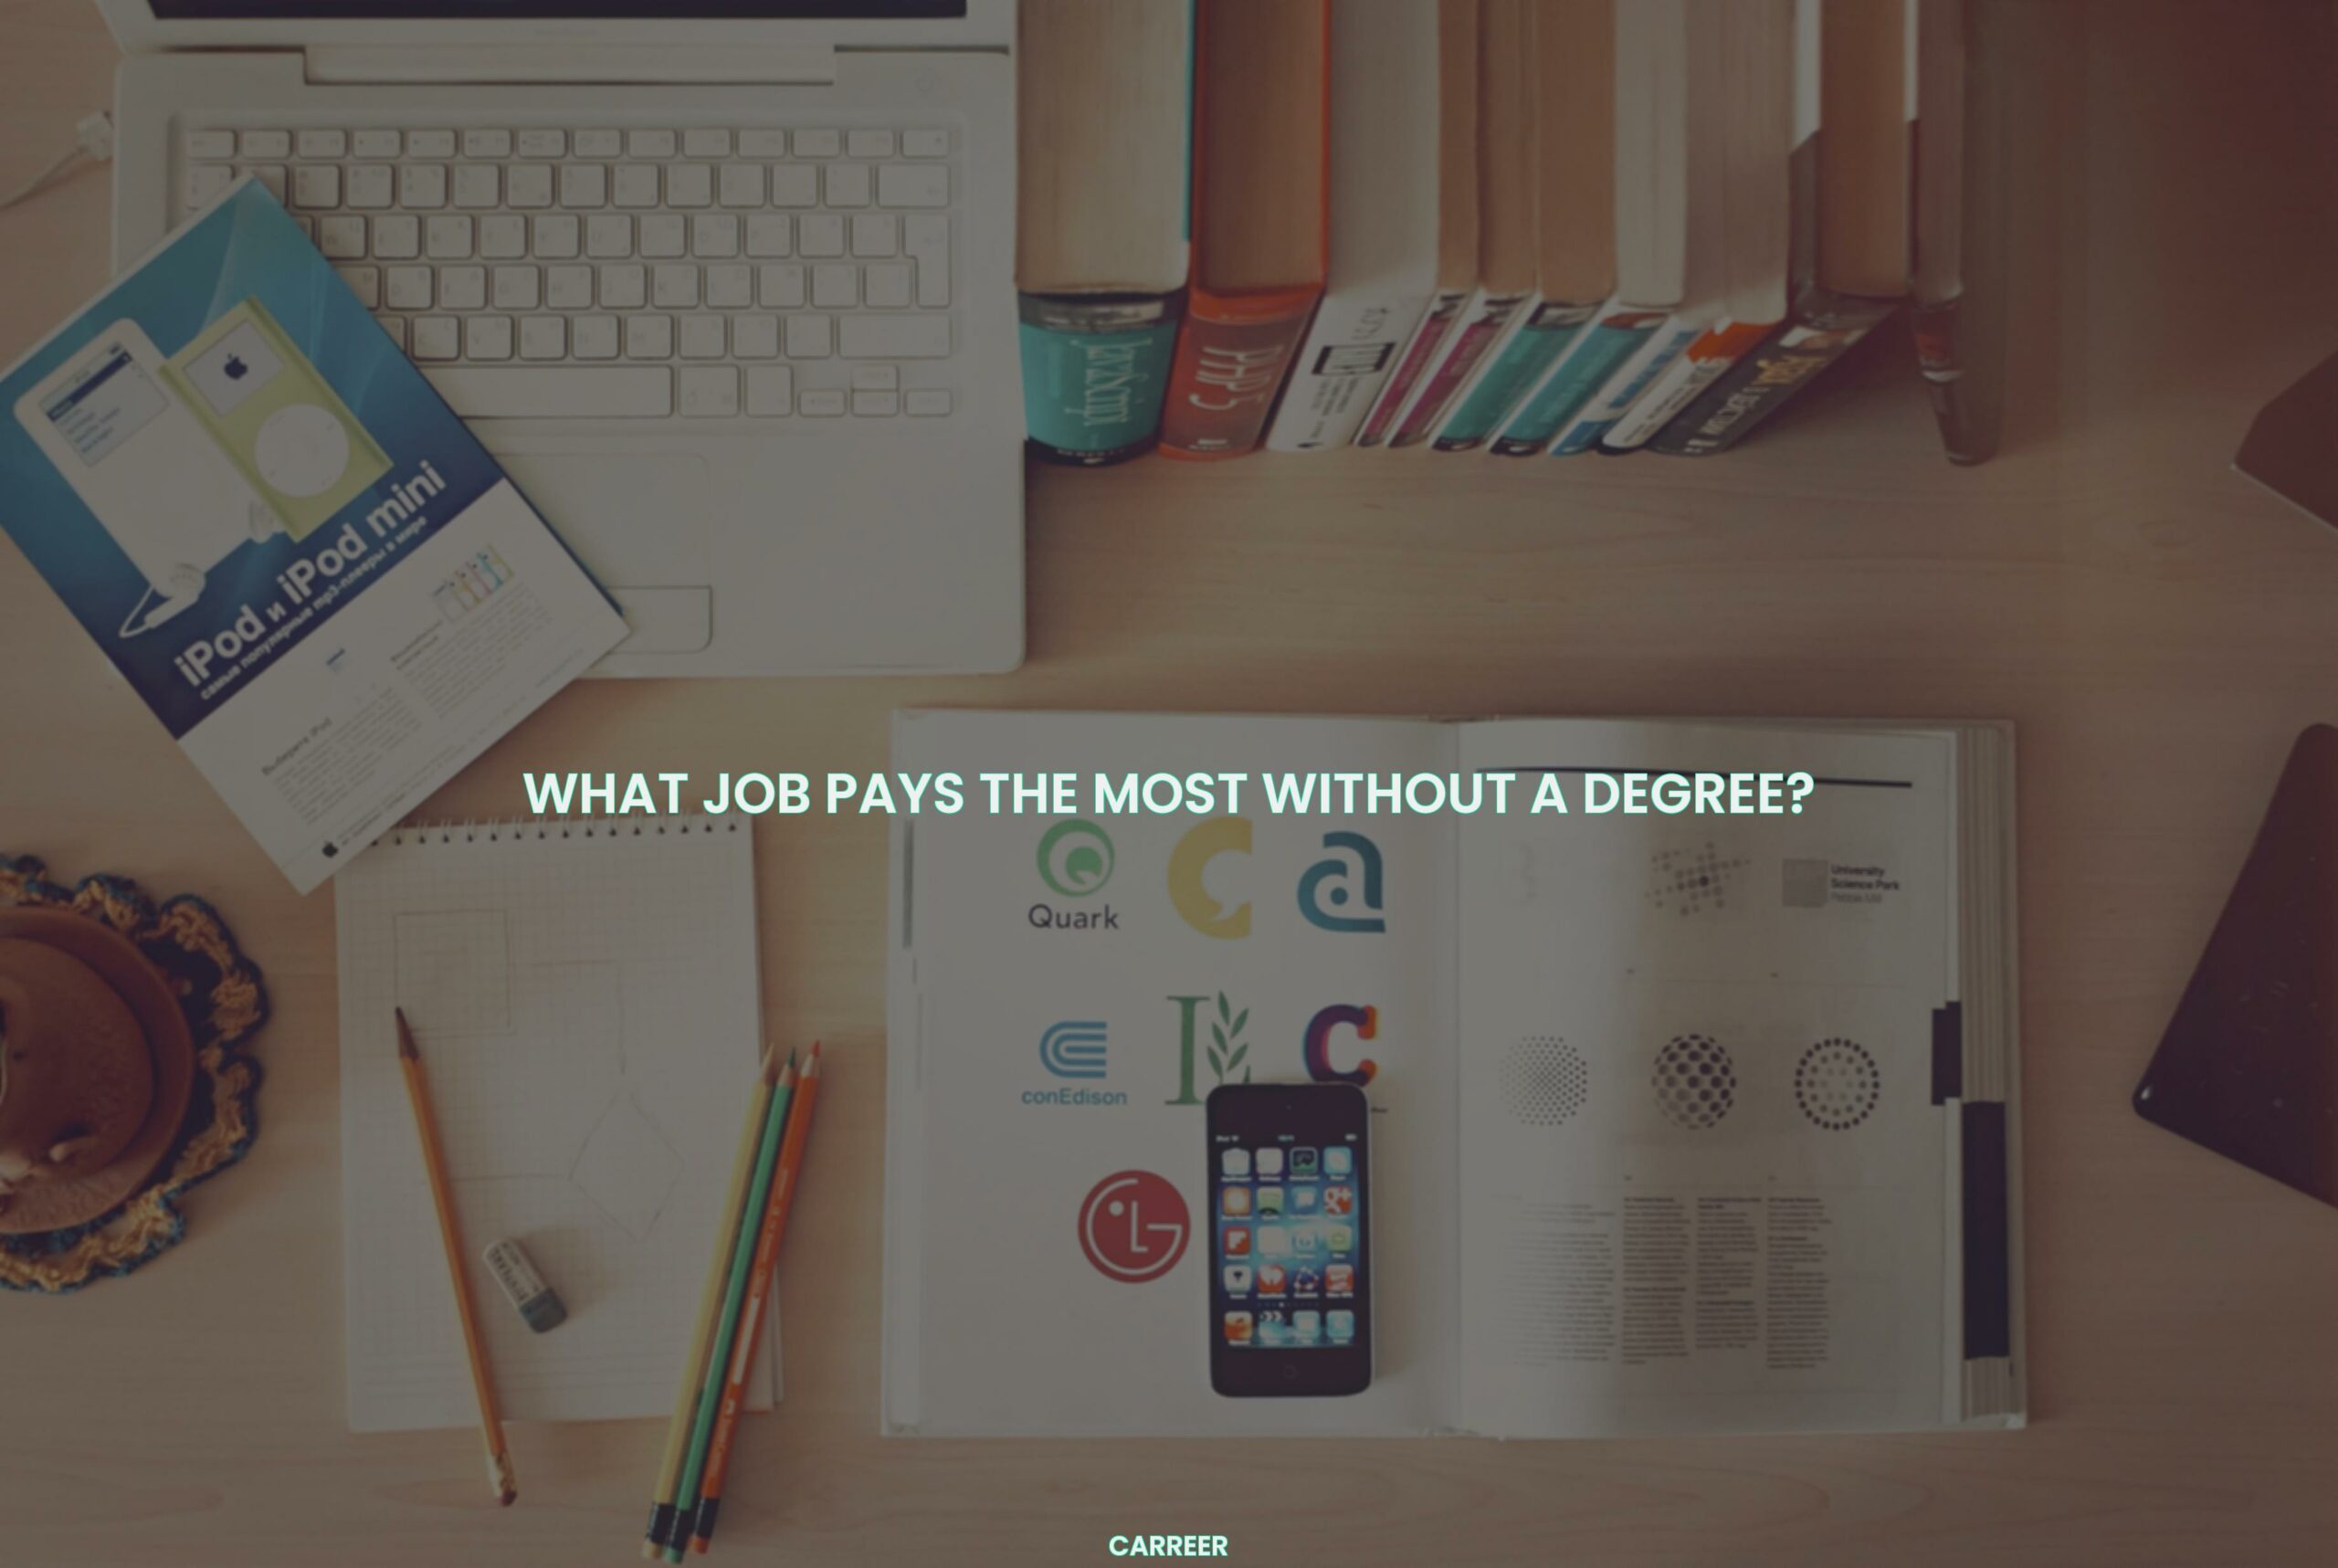 What job pays the most without a degree?